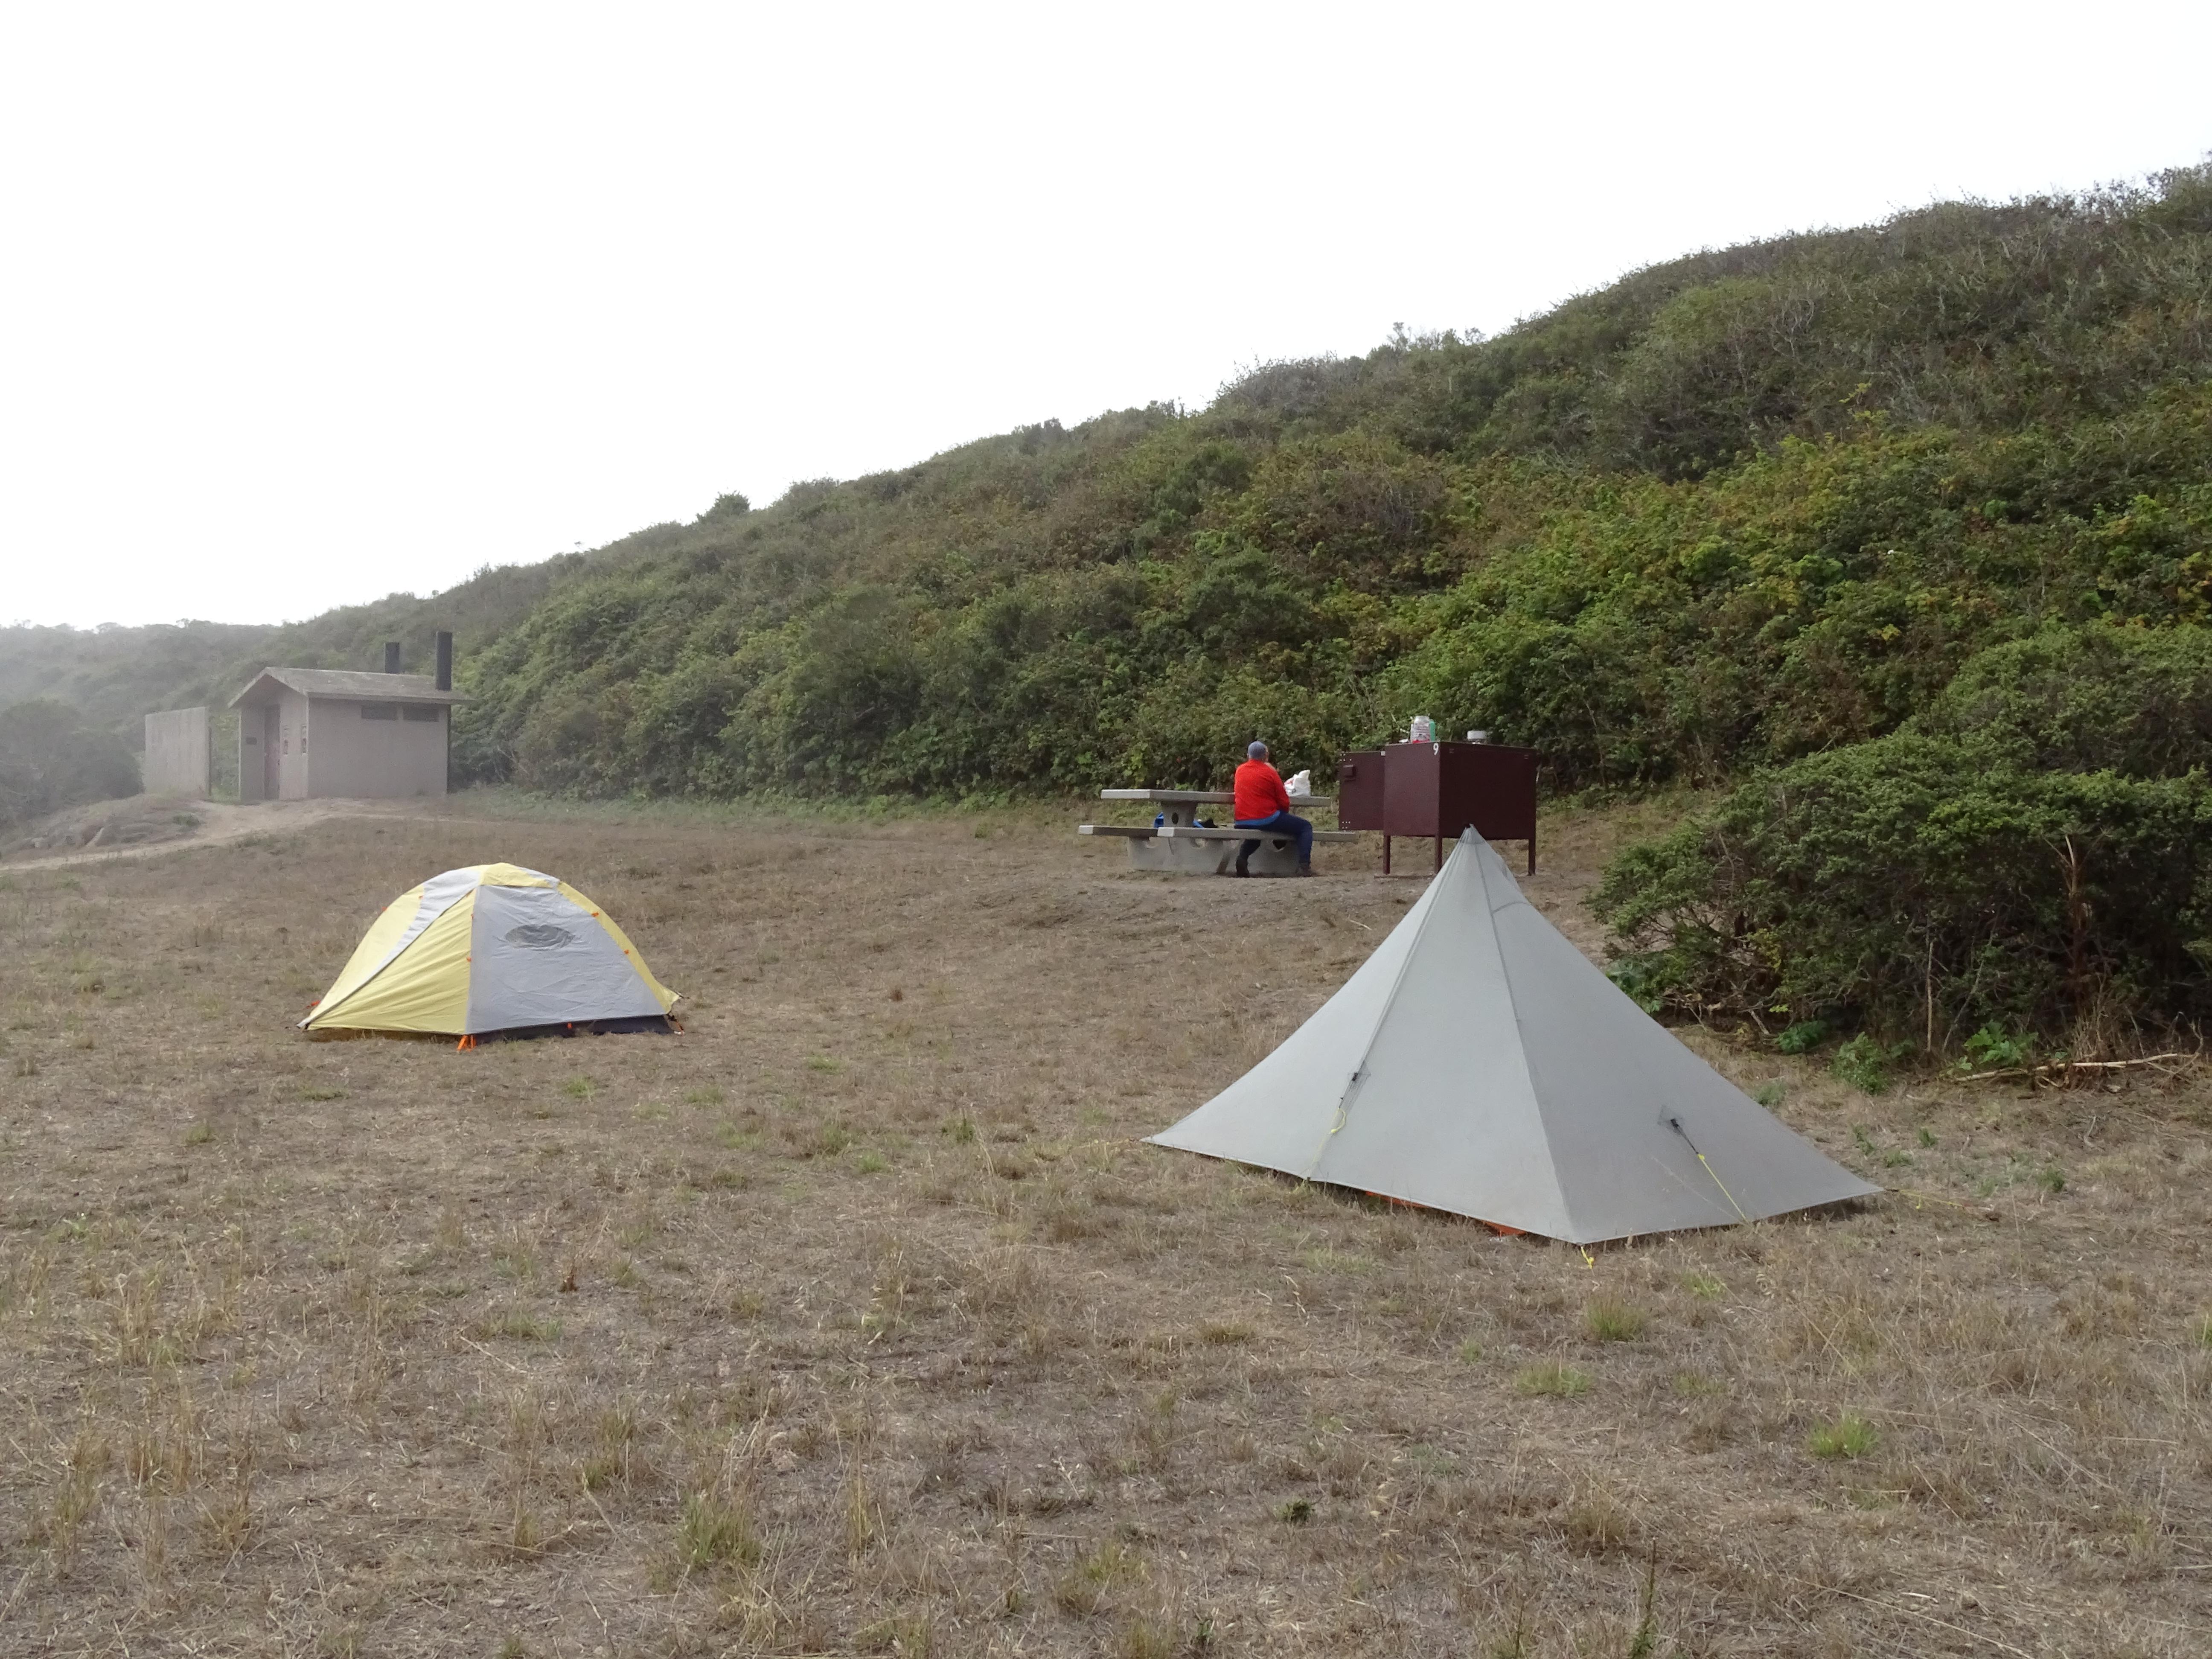 A campsite containing two small tents, a picnic table, and a food storage locker.